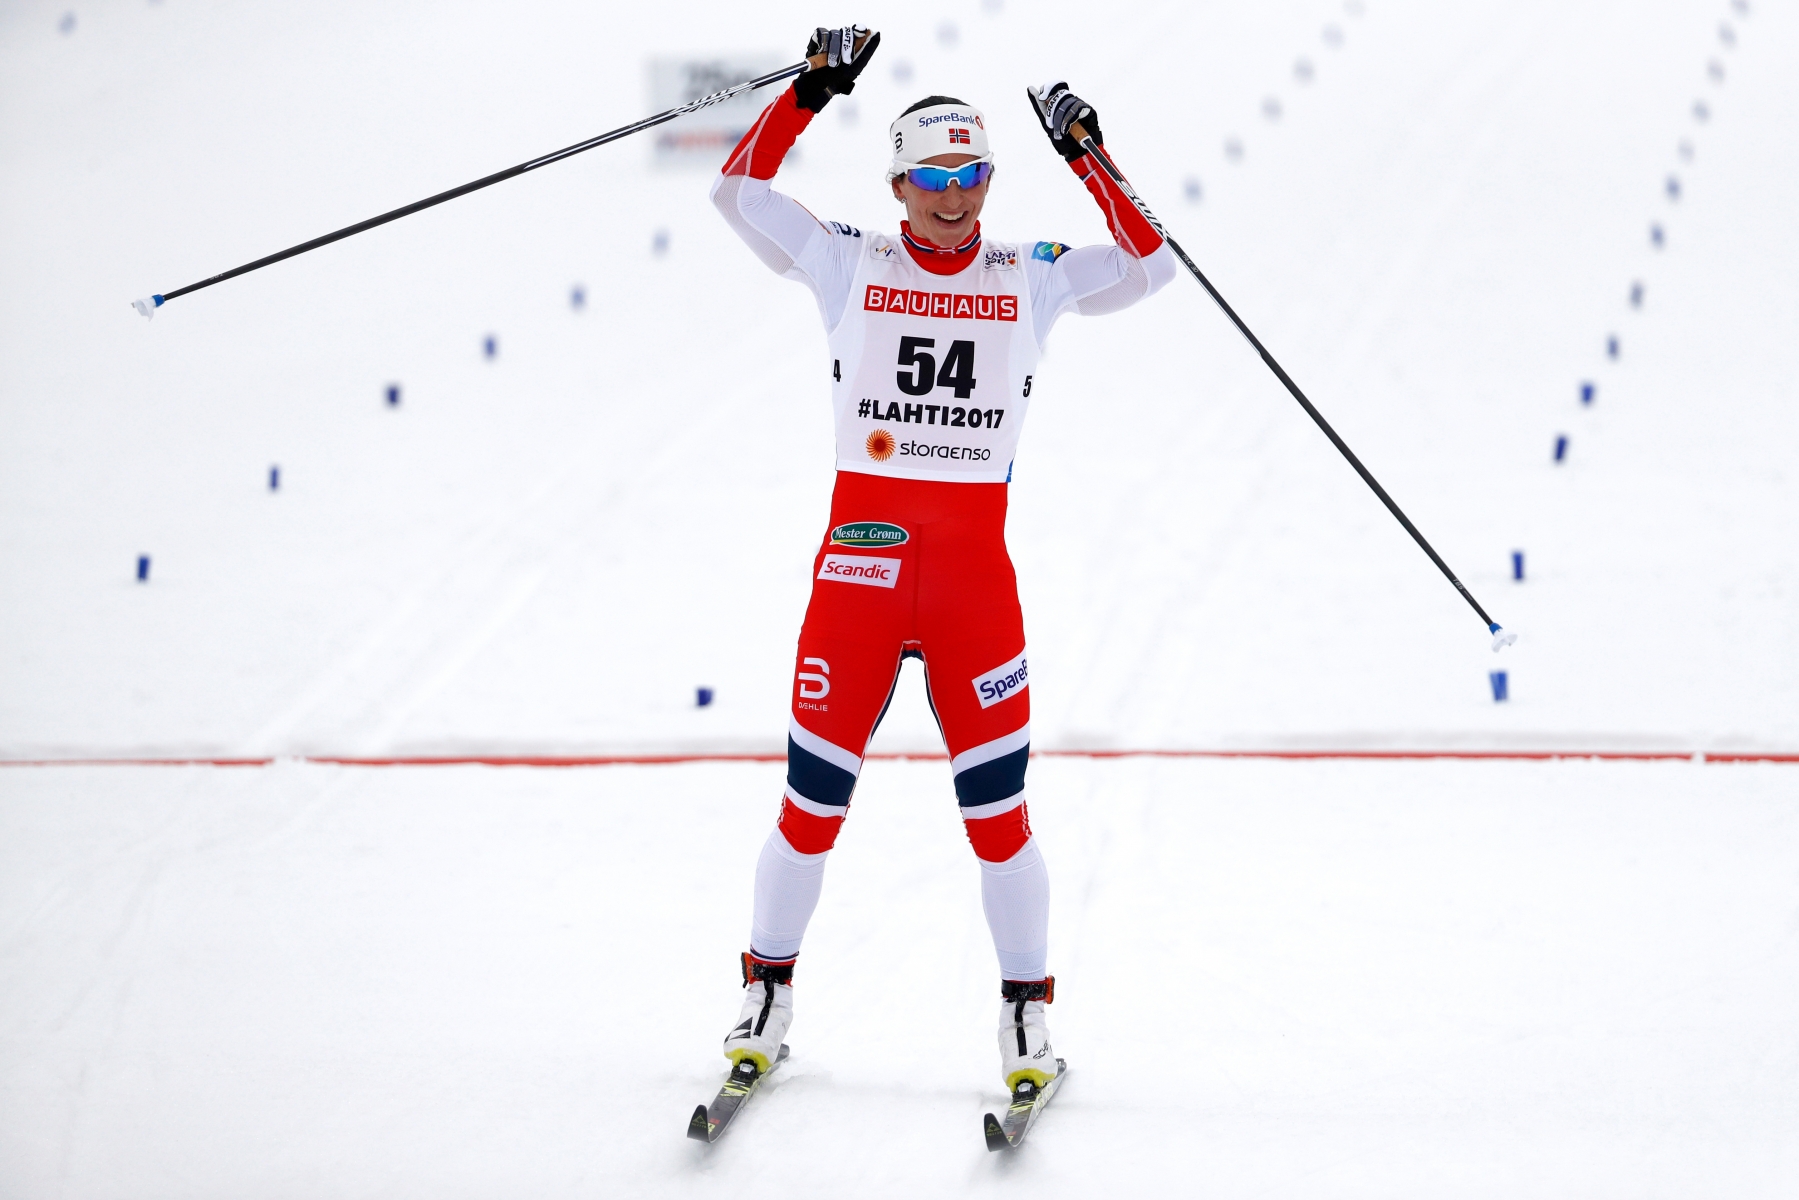 Gold medal winner Marit Bjoergen of Norway celebrates winning the women's cross country skiing 10 km Individual Classic at the 2017 Nordic Skiing World Championships in Lahti, Finland, on Tuesday, February 28, 2017. (KEYSTONE/Peter Klaunzer) FINLAND NORDIC SKIING WORLDS 2017 LAHTI CROSS COUNTRY SKIING SPR